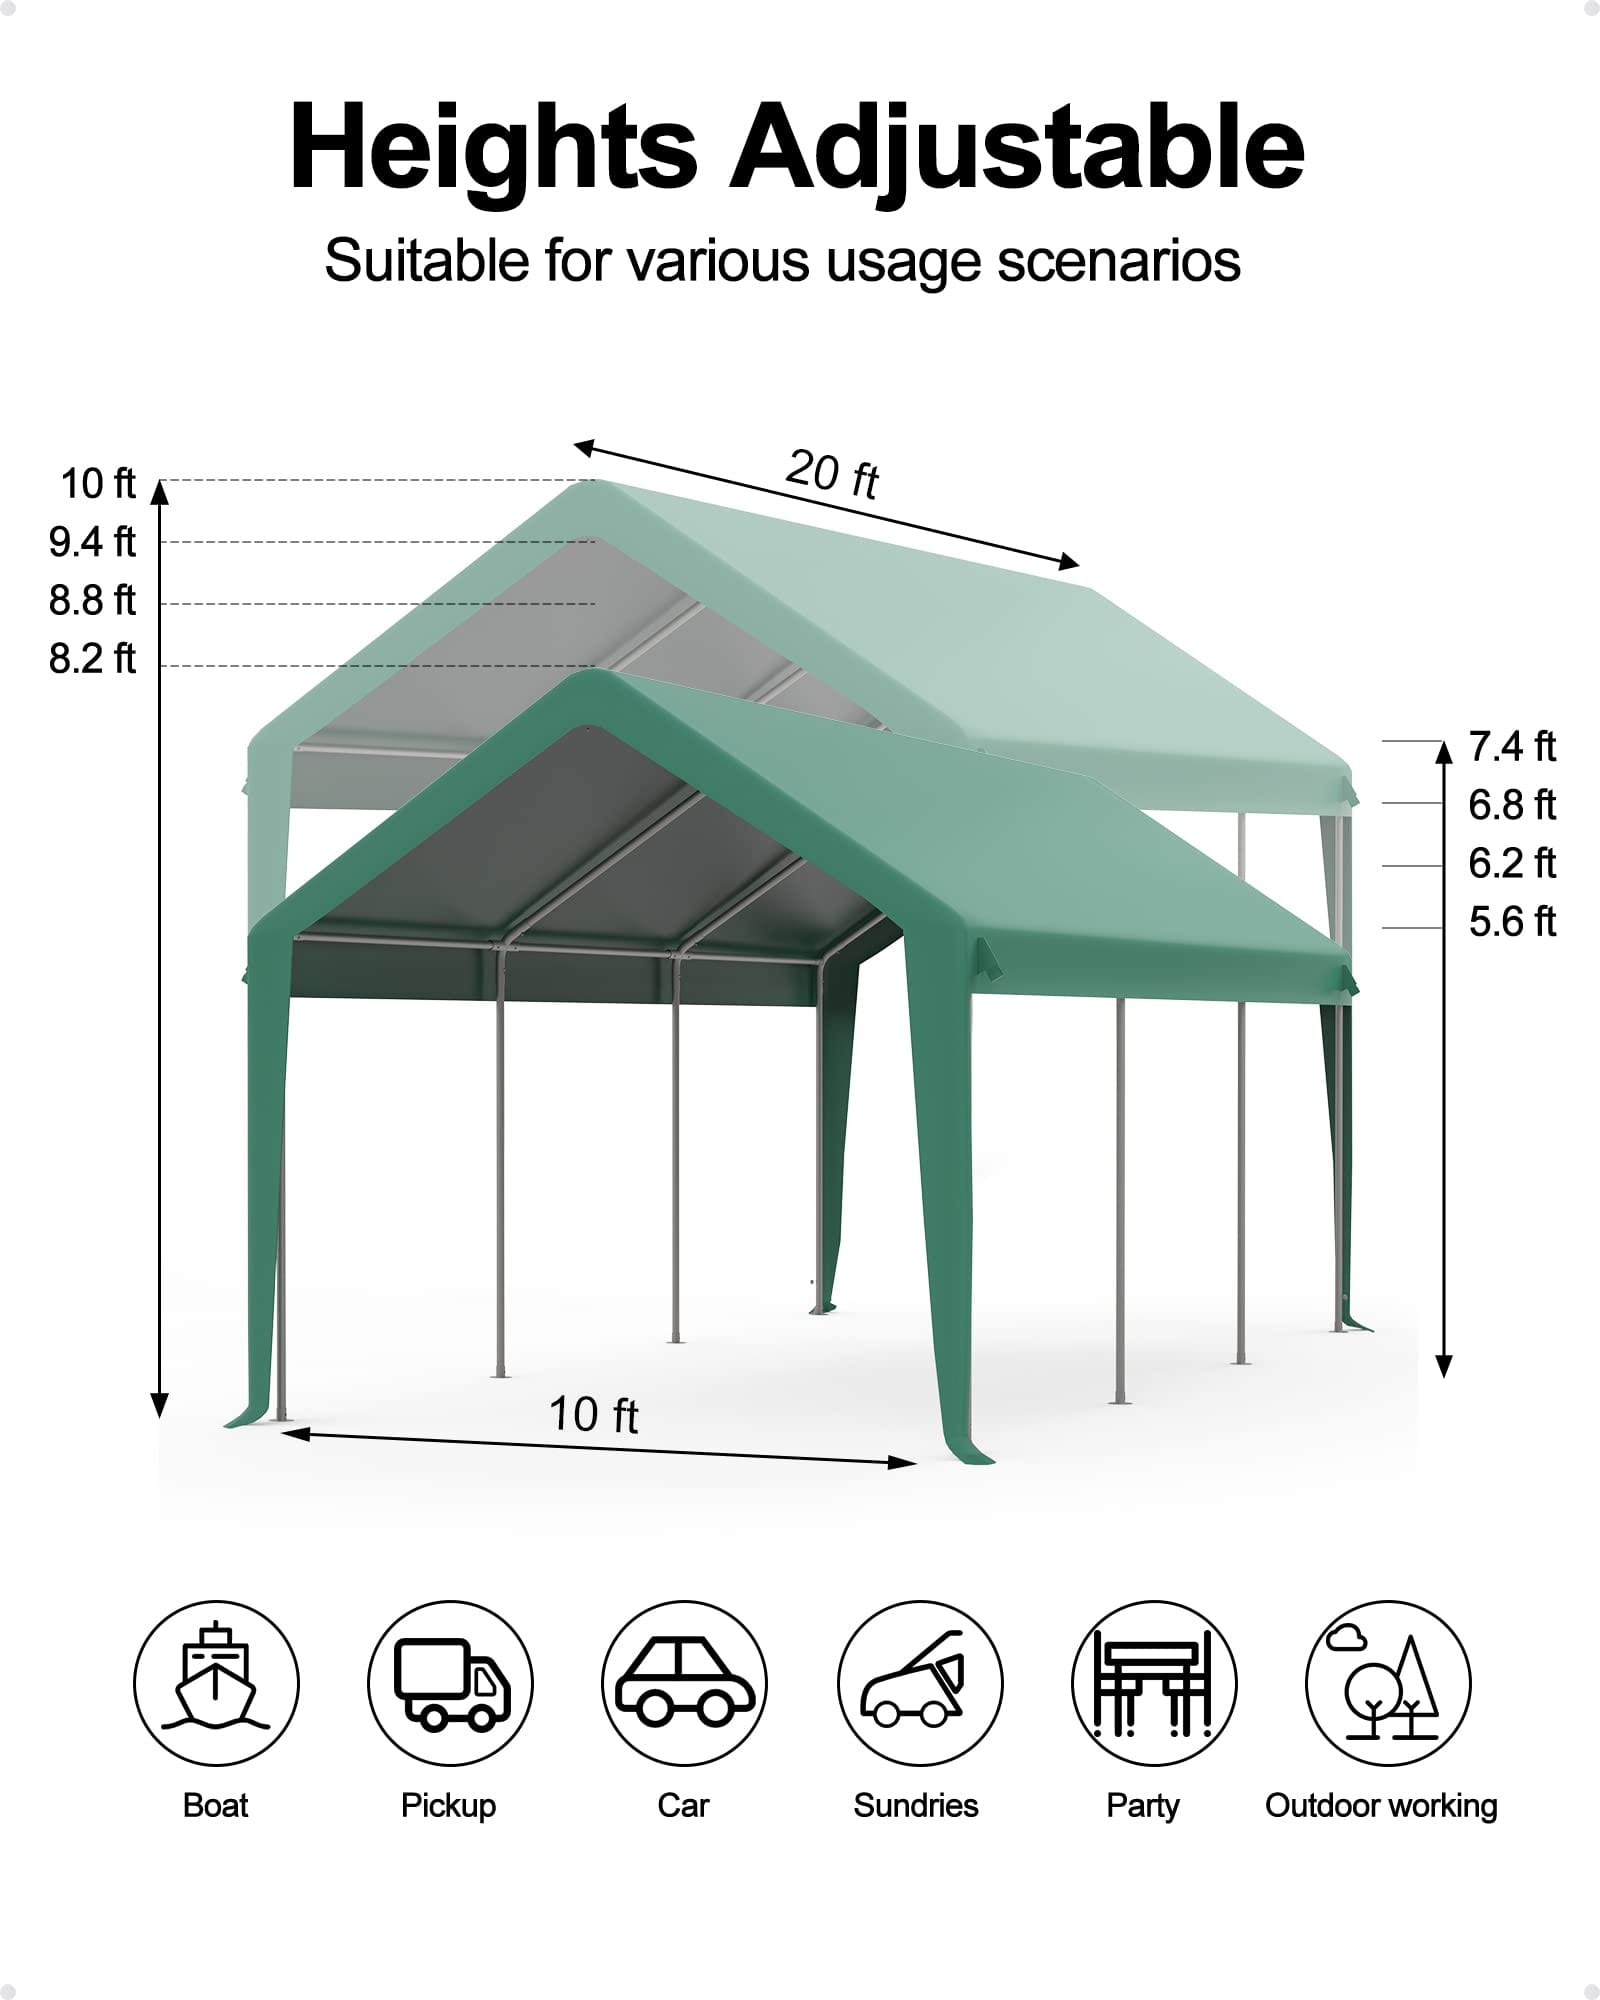 GARVEE Carport 10ft x20ft Heavy Duty Steel Canopy Height Adjustable & Portable Garage With Roll-up Door Without Sidewall Wrap Legs